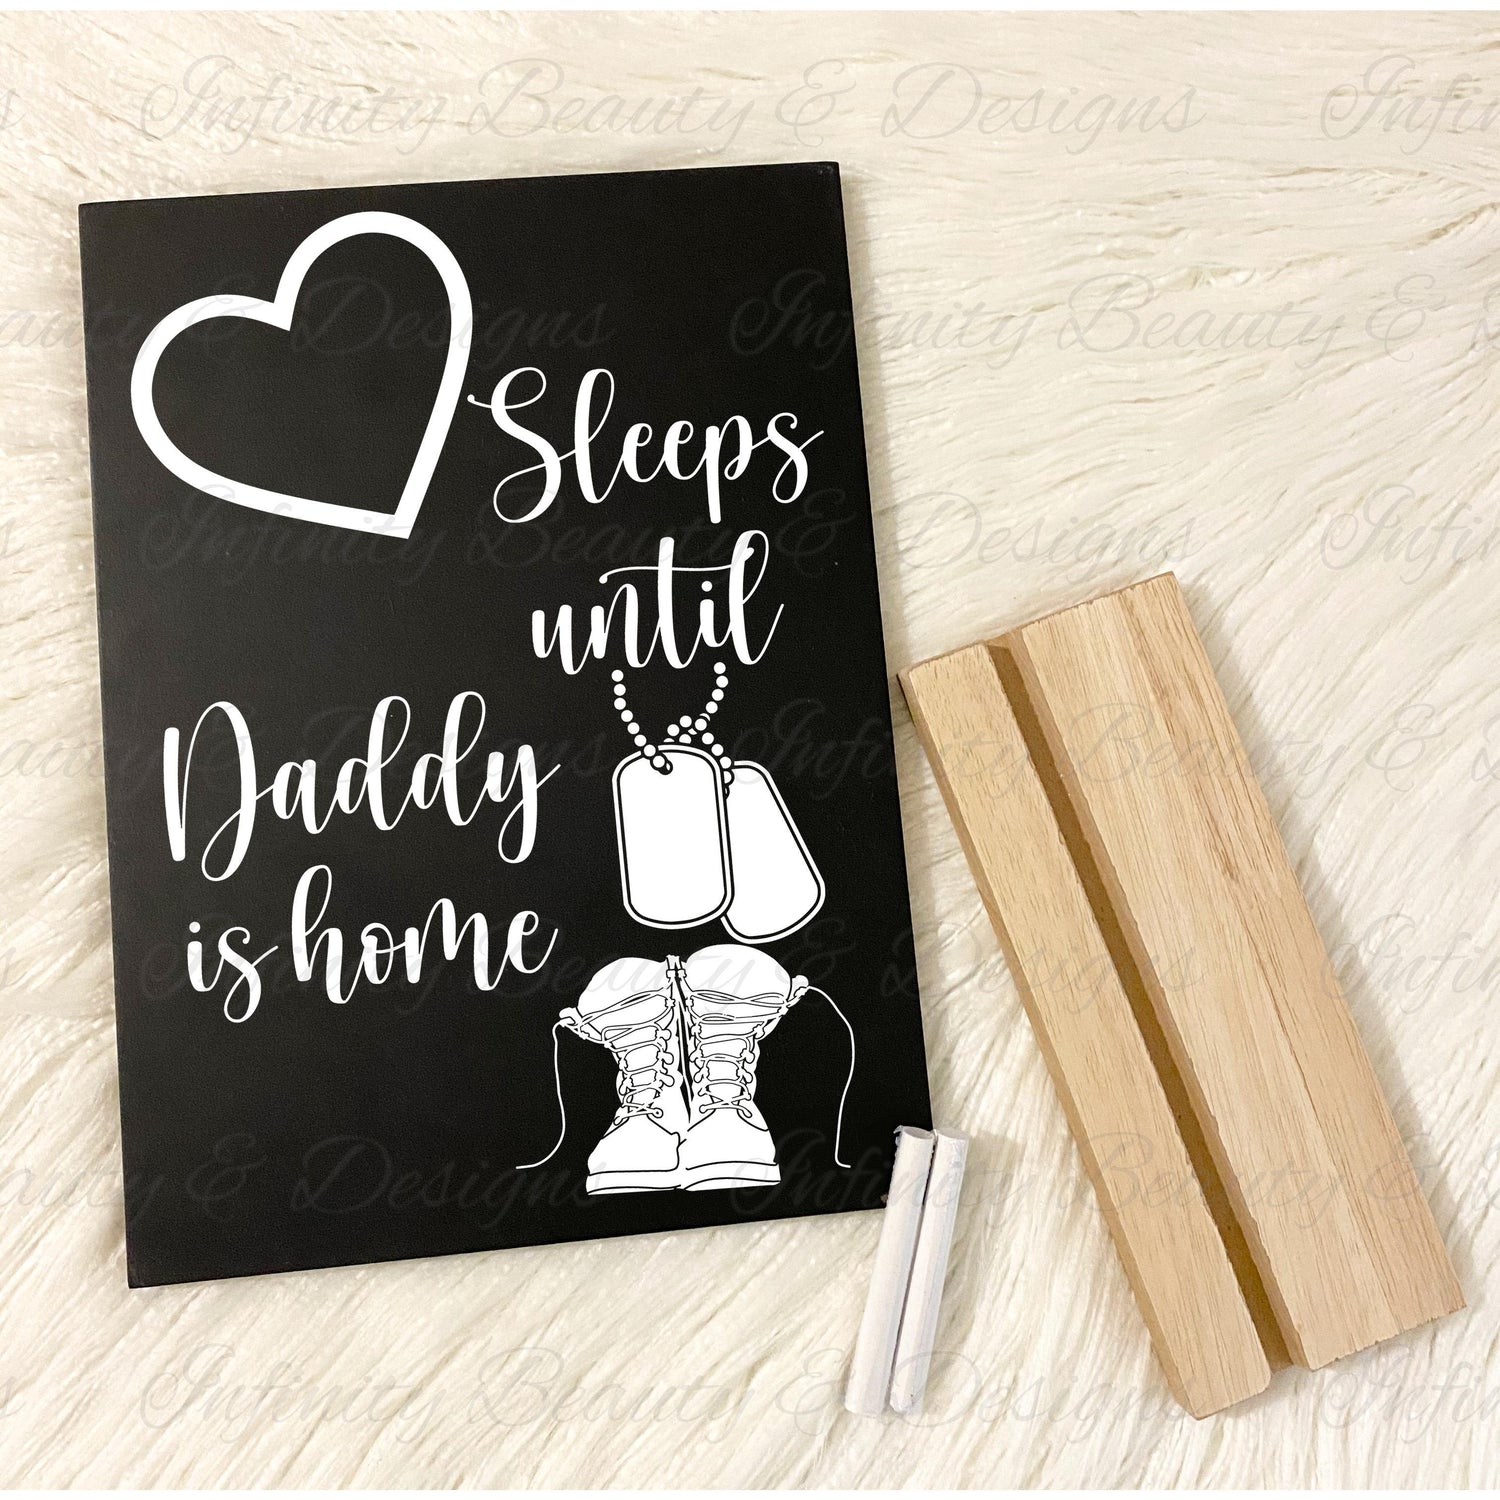 Countdown until Daddy is Home-Infinity Beauty & Designs